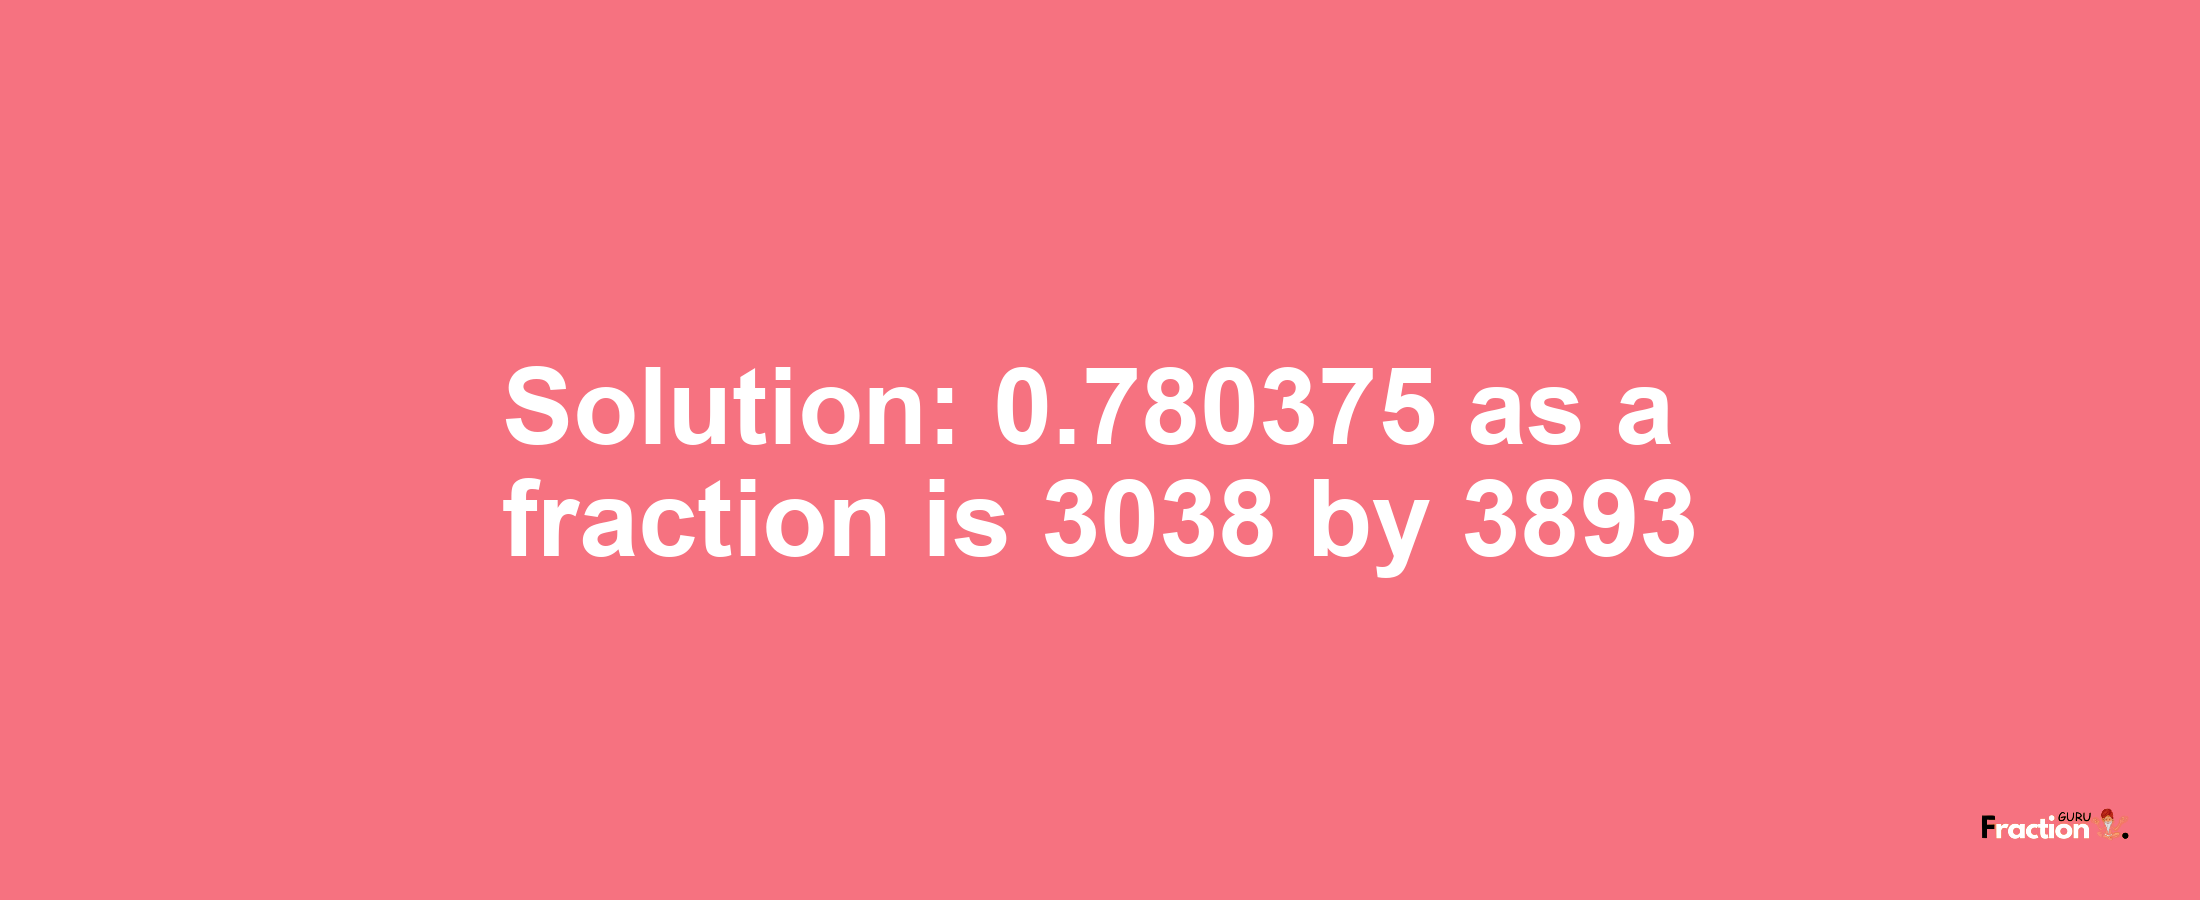 Solution:0.780375 as a fraction is 3038/3893